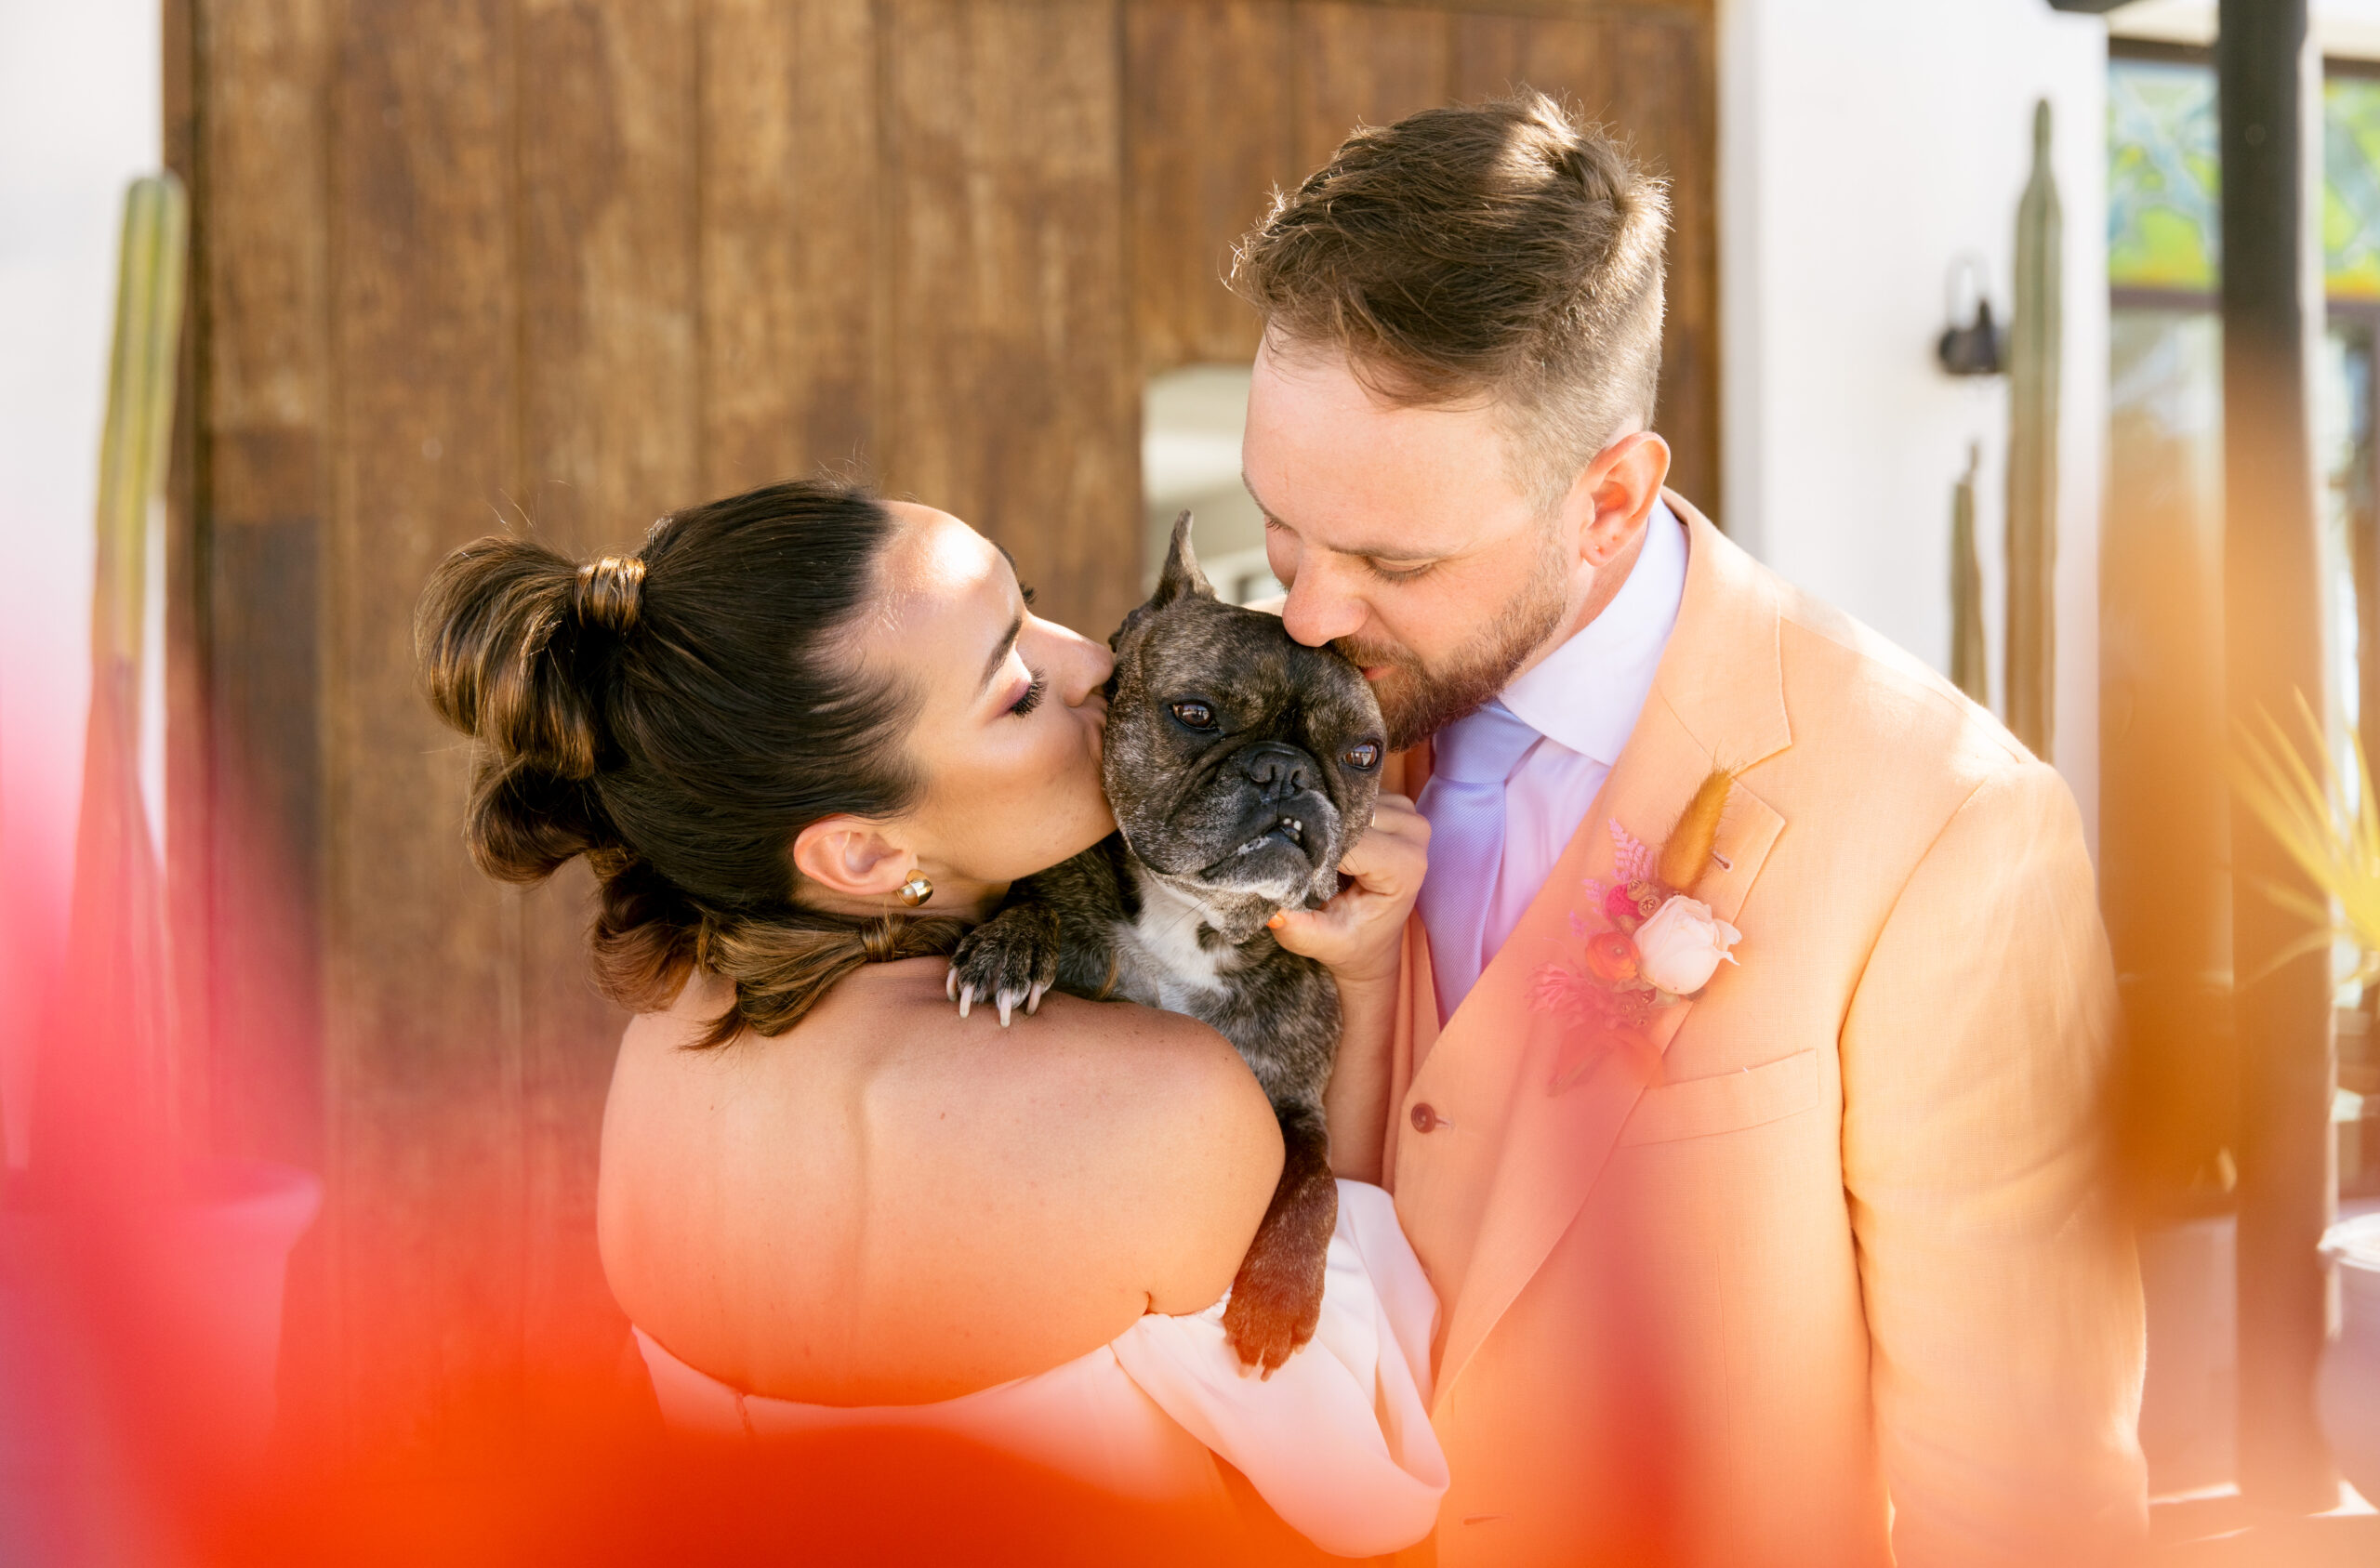 verona wedding gown kamperett strapless wedding dress with detachable sleeves. colorful wedding in mexico. bridal wedding portrait mohawk high bubble ponytail hairstyle. chartreuse dolce vida shoes. 
groom peach cotswold tailors suit with light blue tie and orange and pink boutenir. bride and groom wedding portrait holding brindle french bulldog with hot pink out of focus floral in the foreground. artsy wedding portraits. 